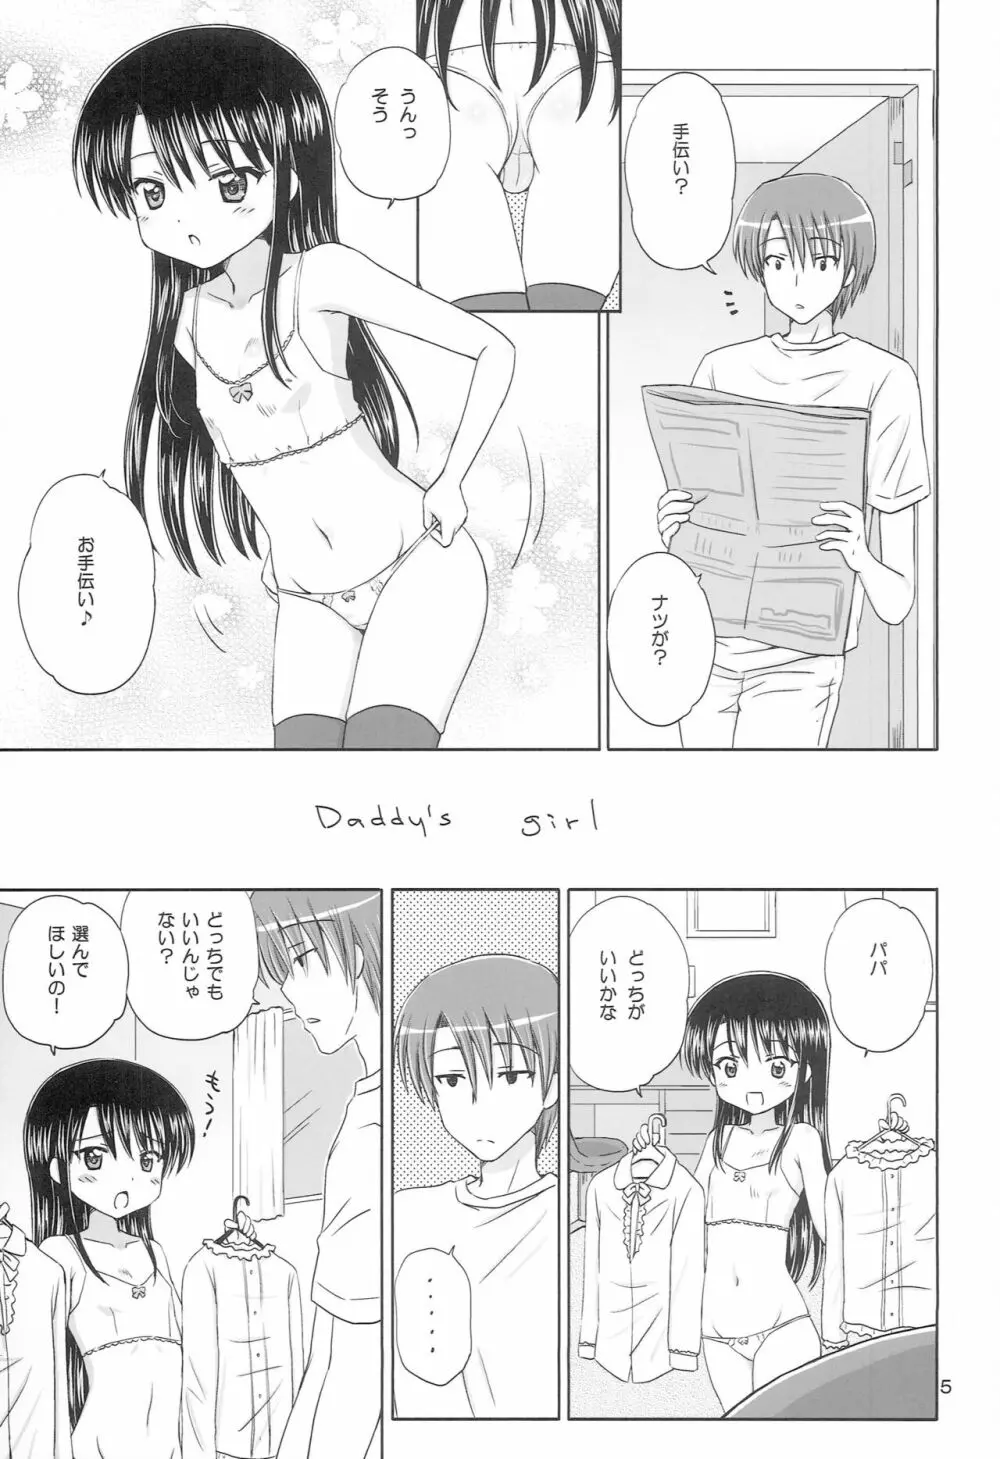 DG - Daddy’s Girl Vol.6 Page.4